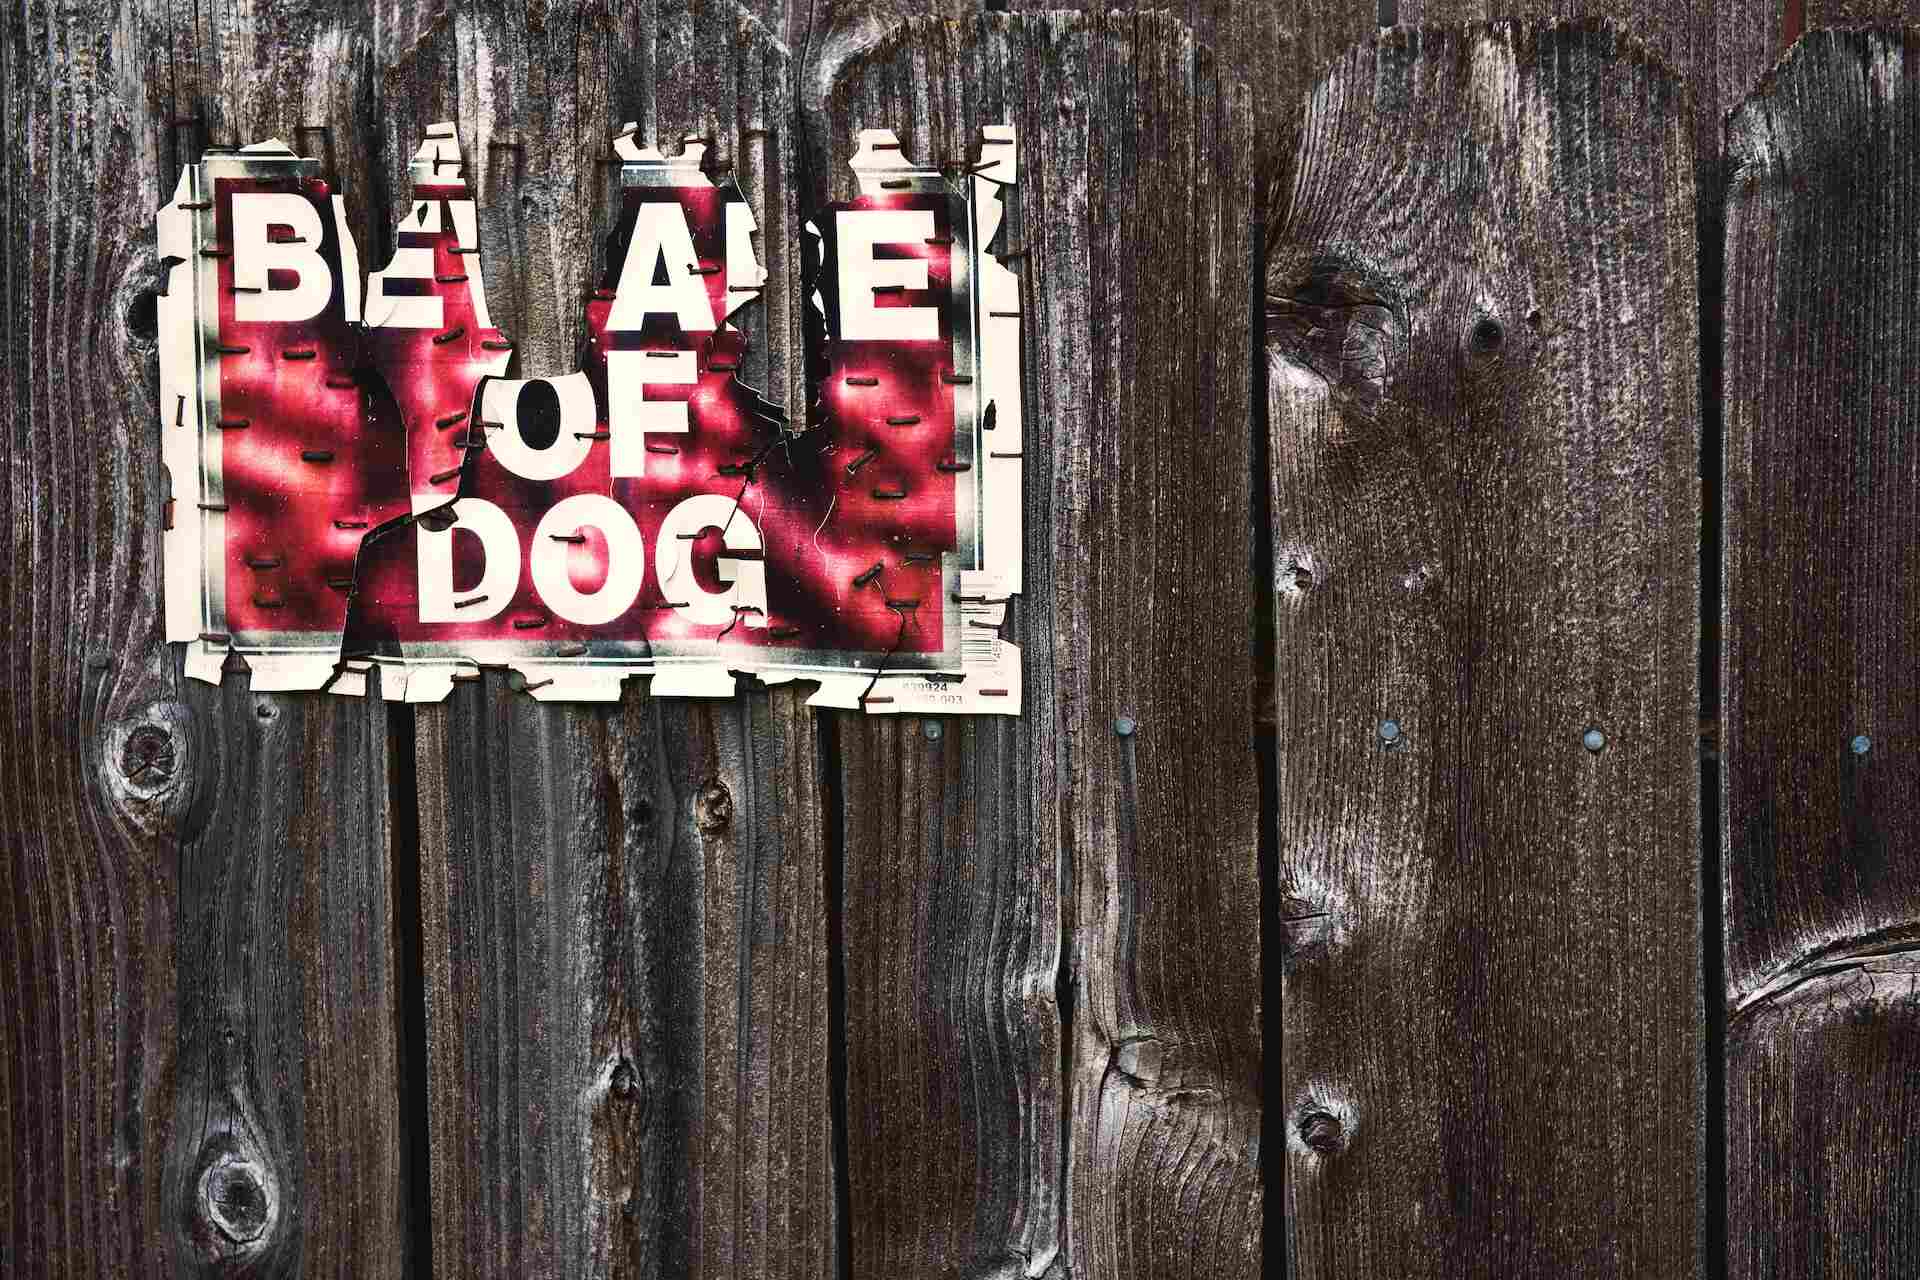 beware of dog sign on wooden fence